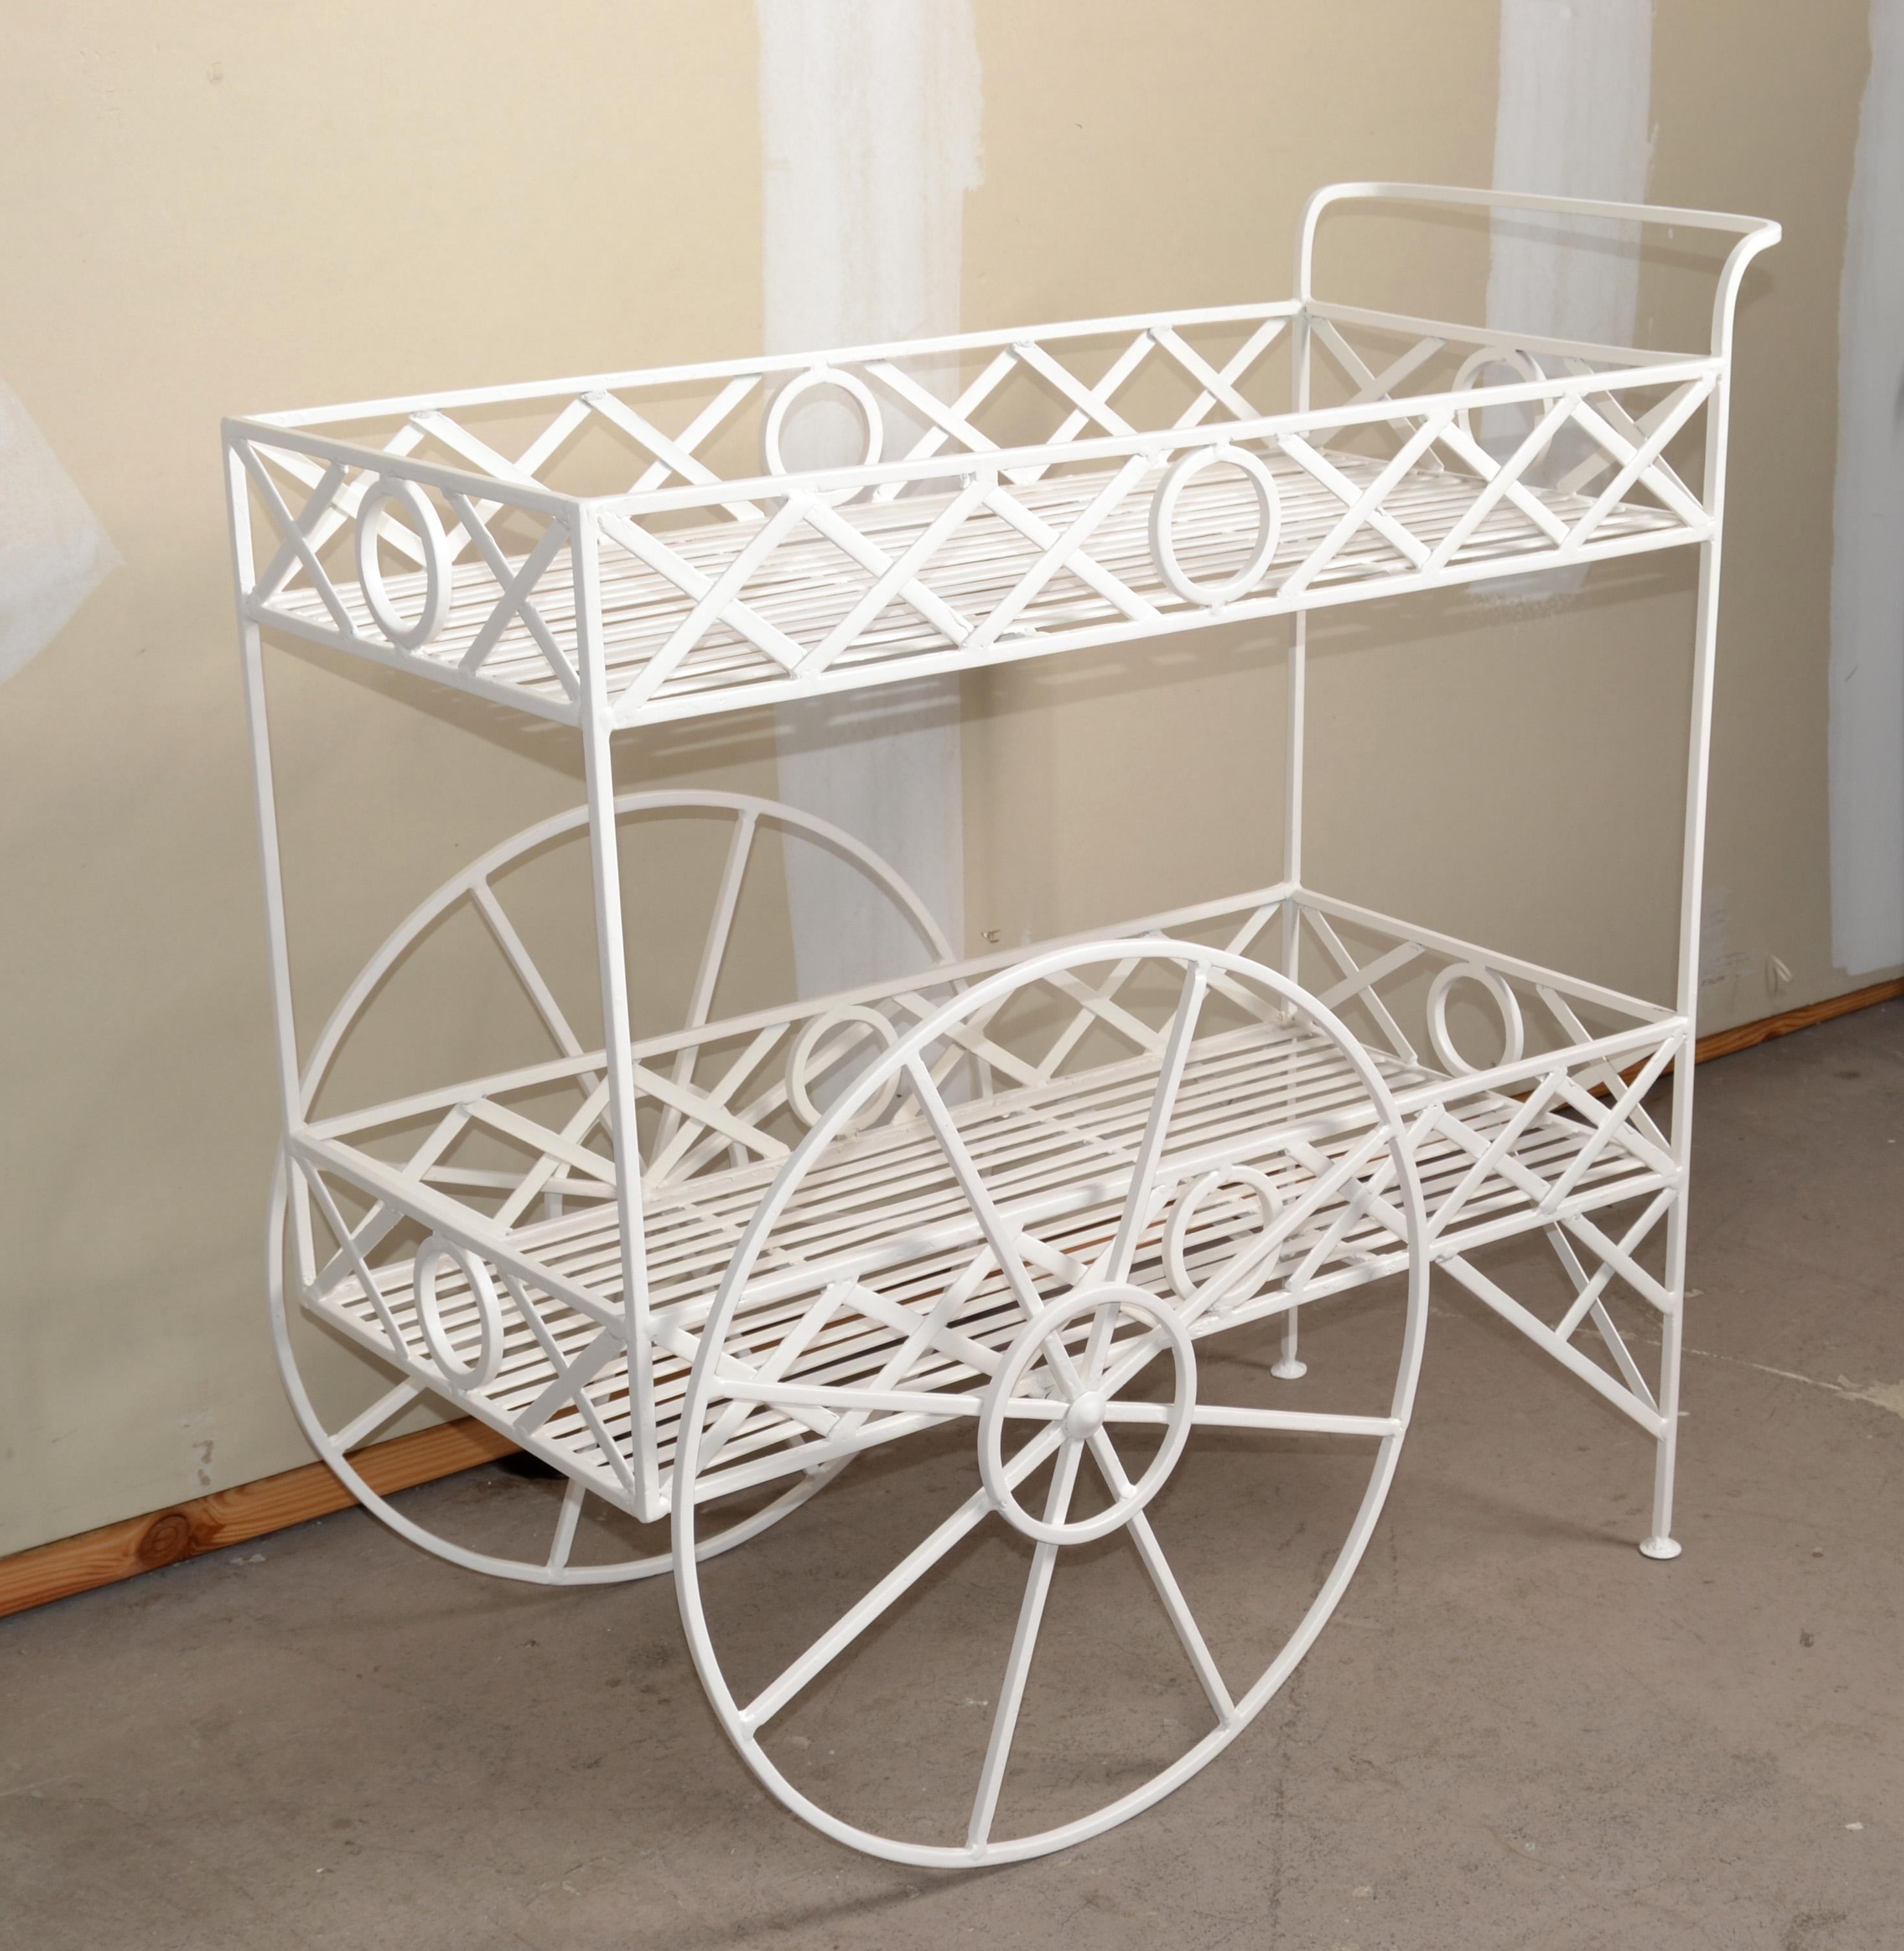 1950s Mid-Century Modern Paris Style 2 Tier Outdoor Dry Bar Cart, Kitchen Cart, Marketplace Flower cart in white Finish.  
Handcrafted Metal slabs with raised borders and two large wheels. Whimsical Tic Tac Toe Design brings Fun to any